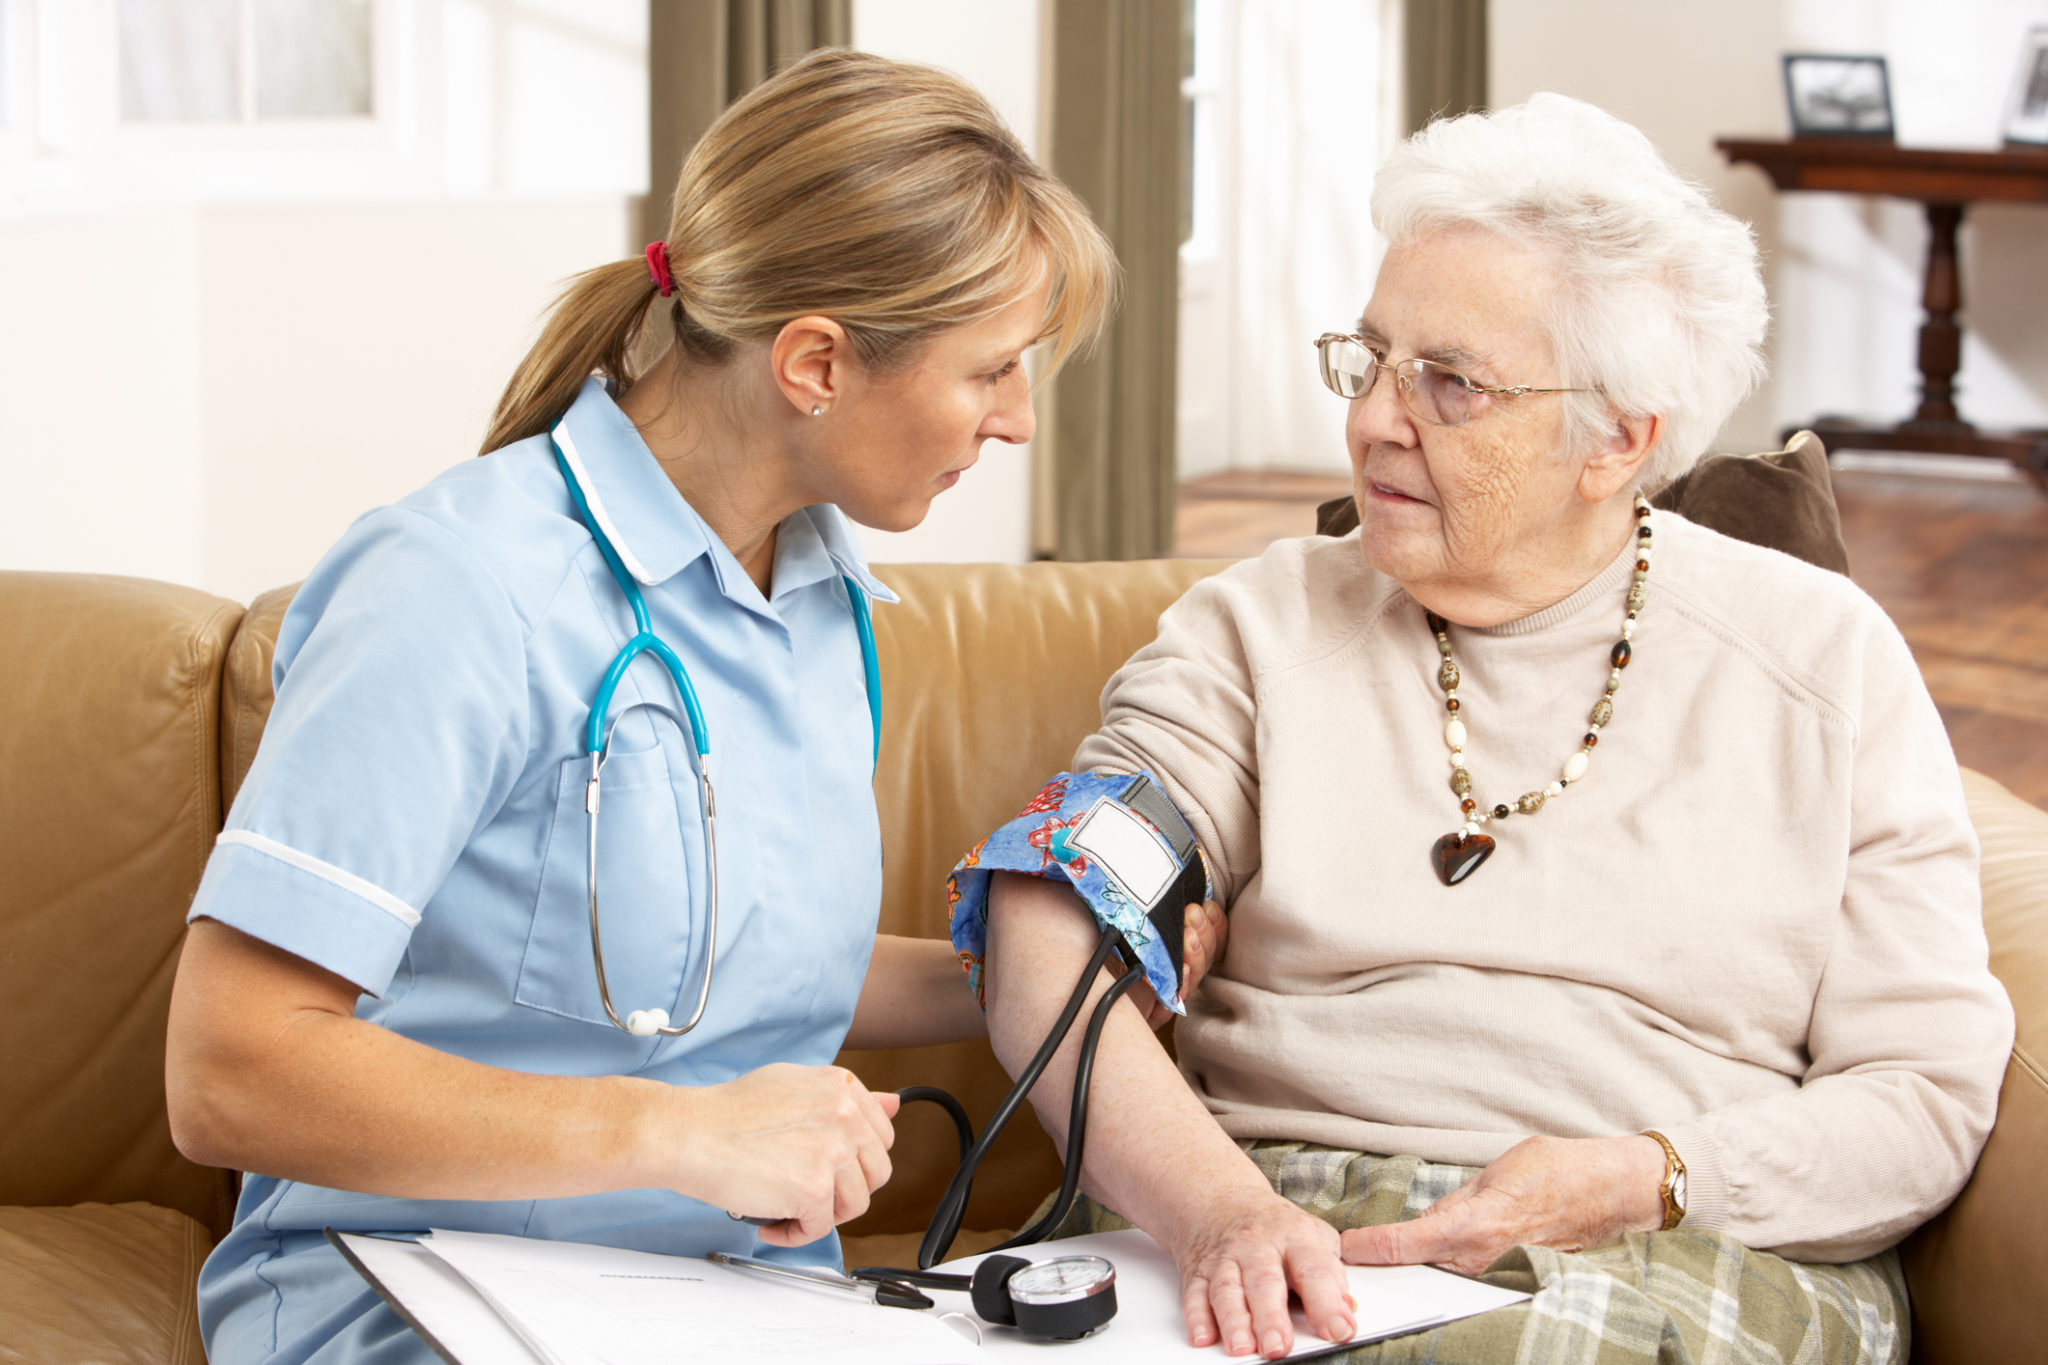 Senior Woman Having Blood Pressure Taken By Health Visitor At Home Looking At Each Other 2048 x 1365